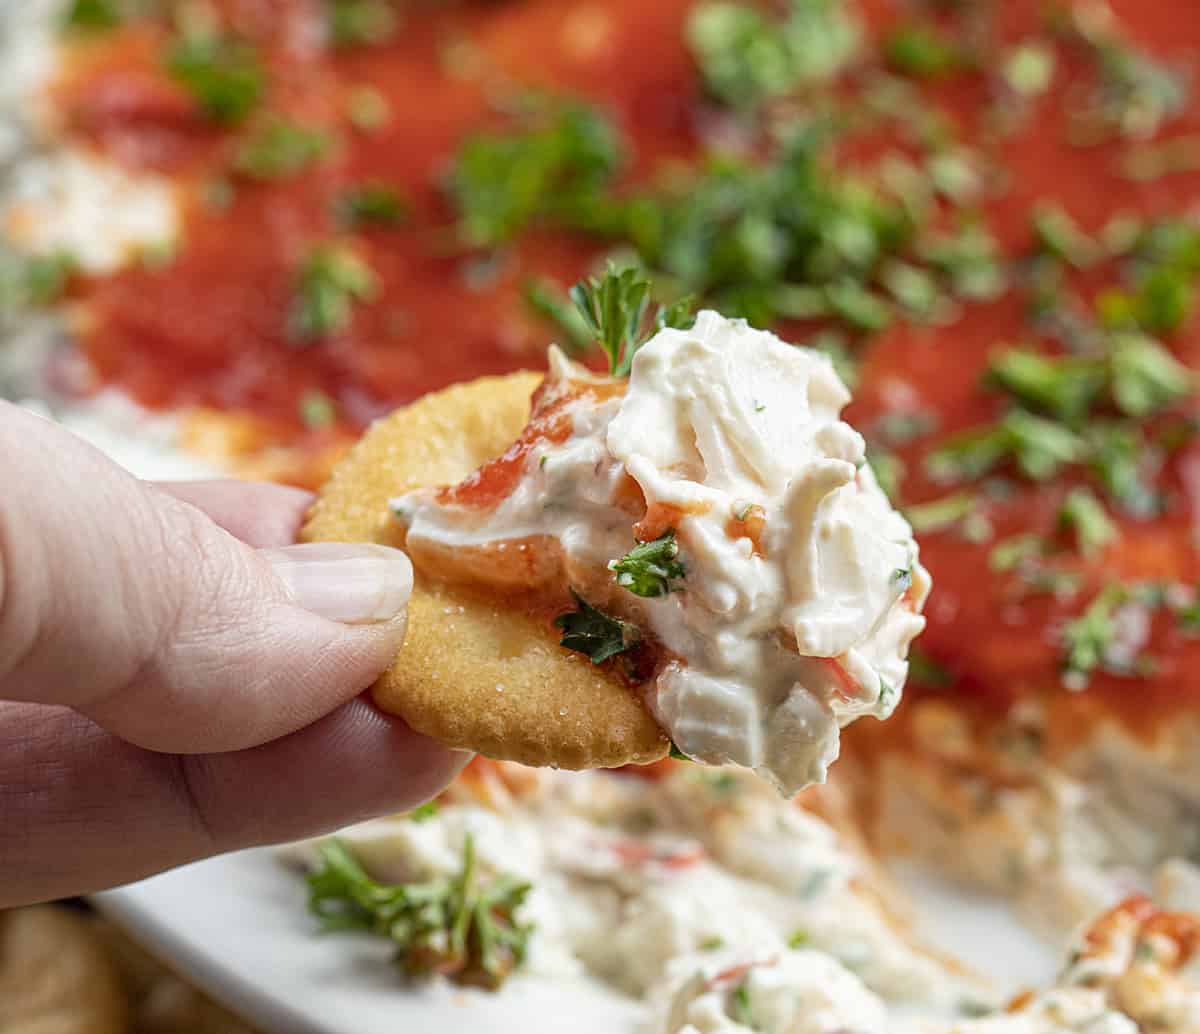 Cracker with Easy Crab Dip on It